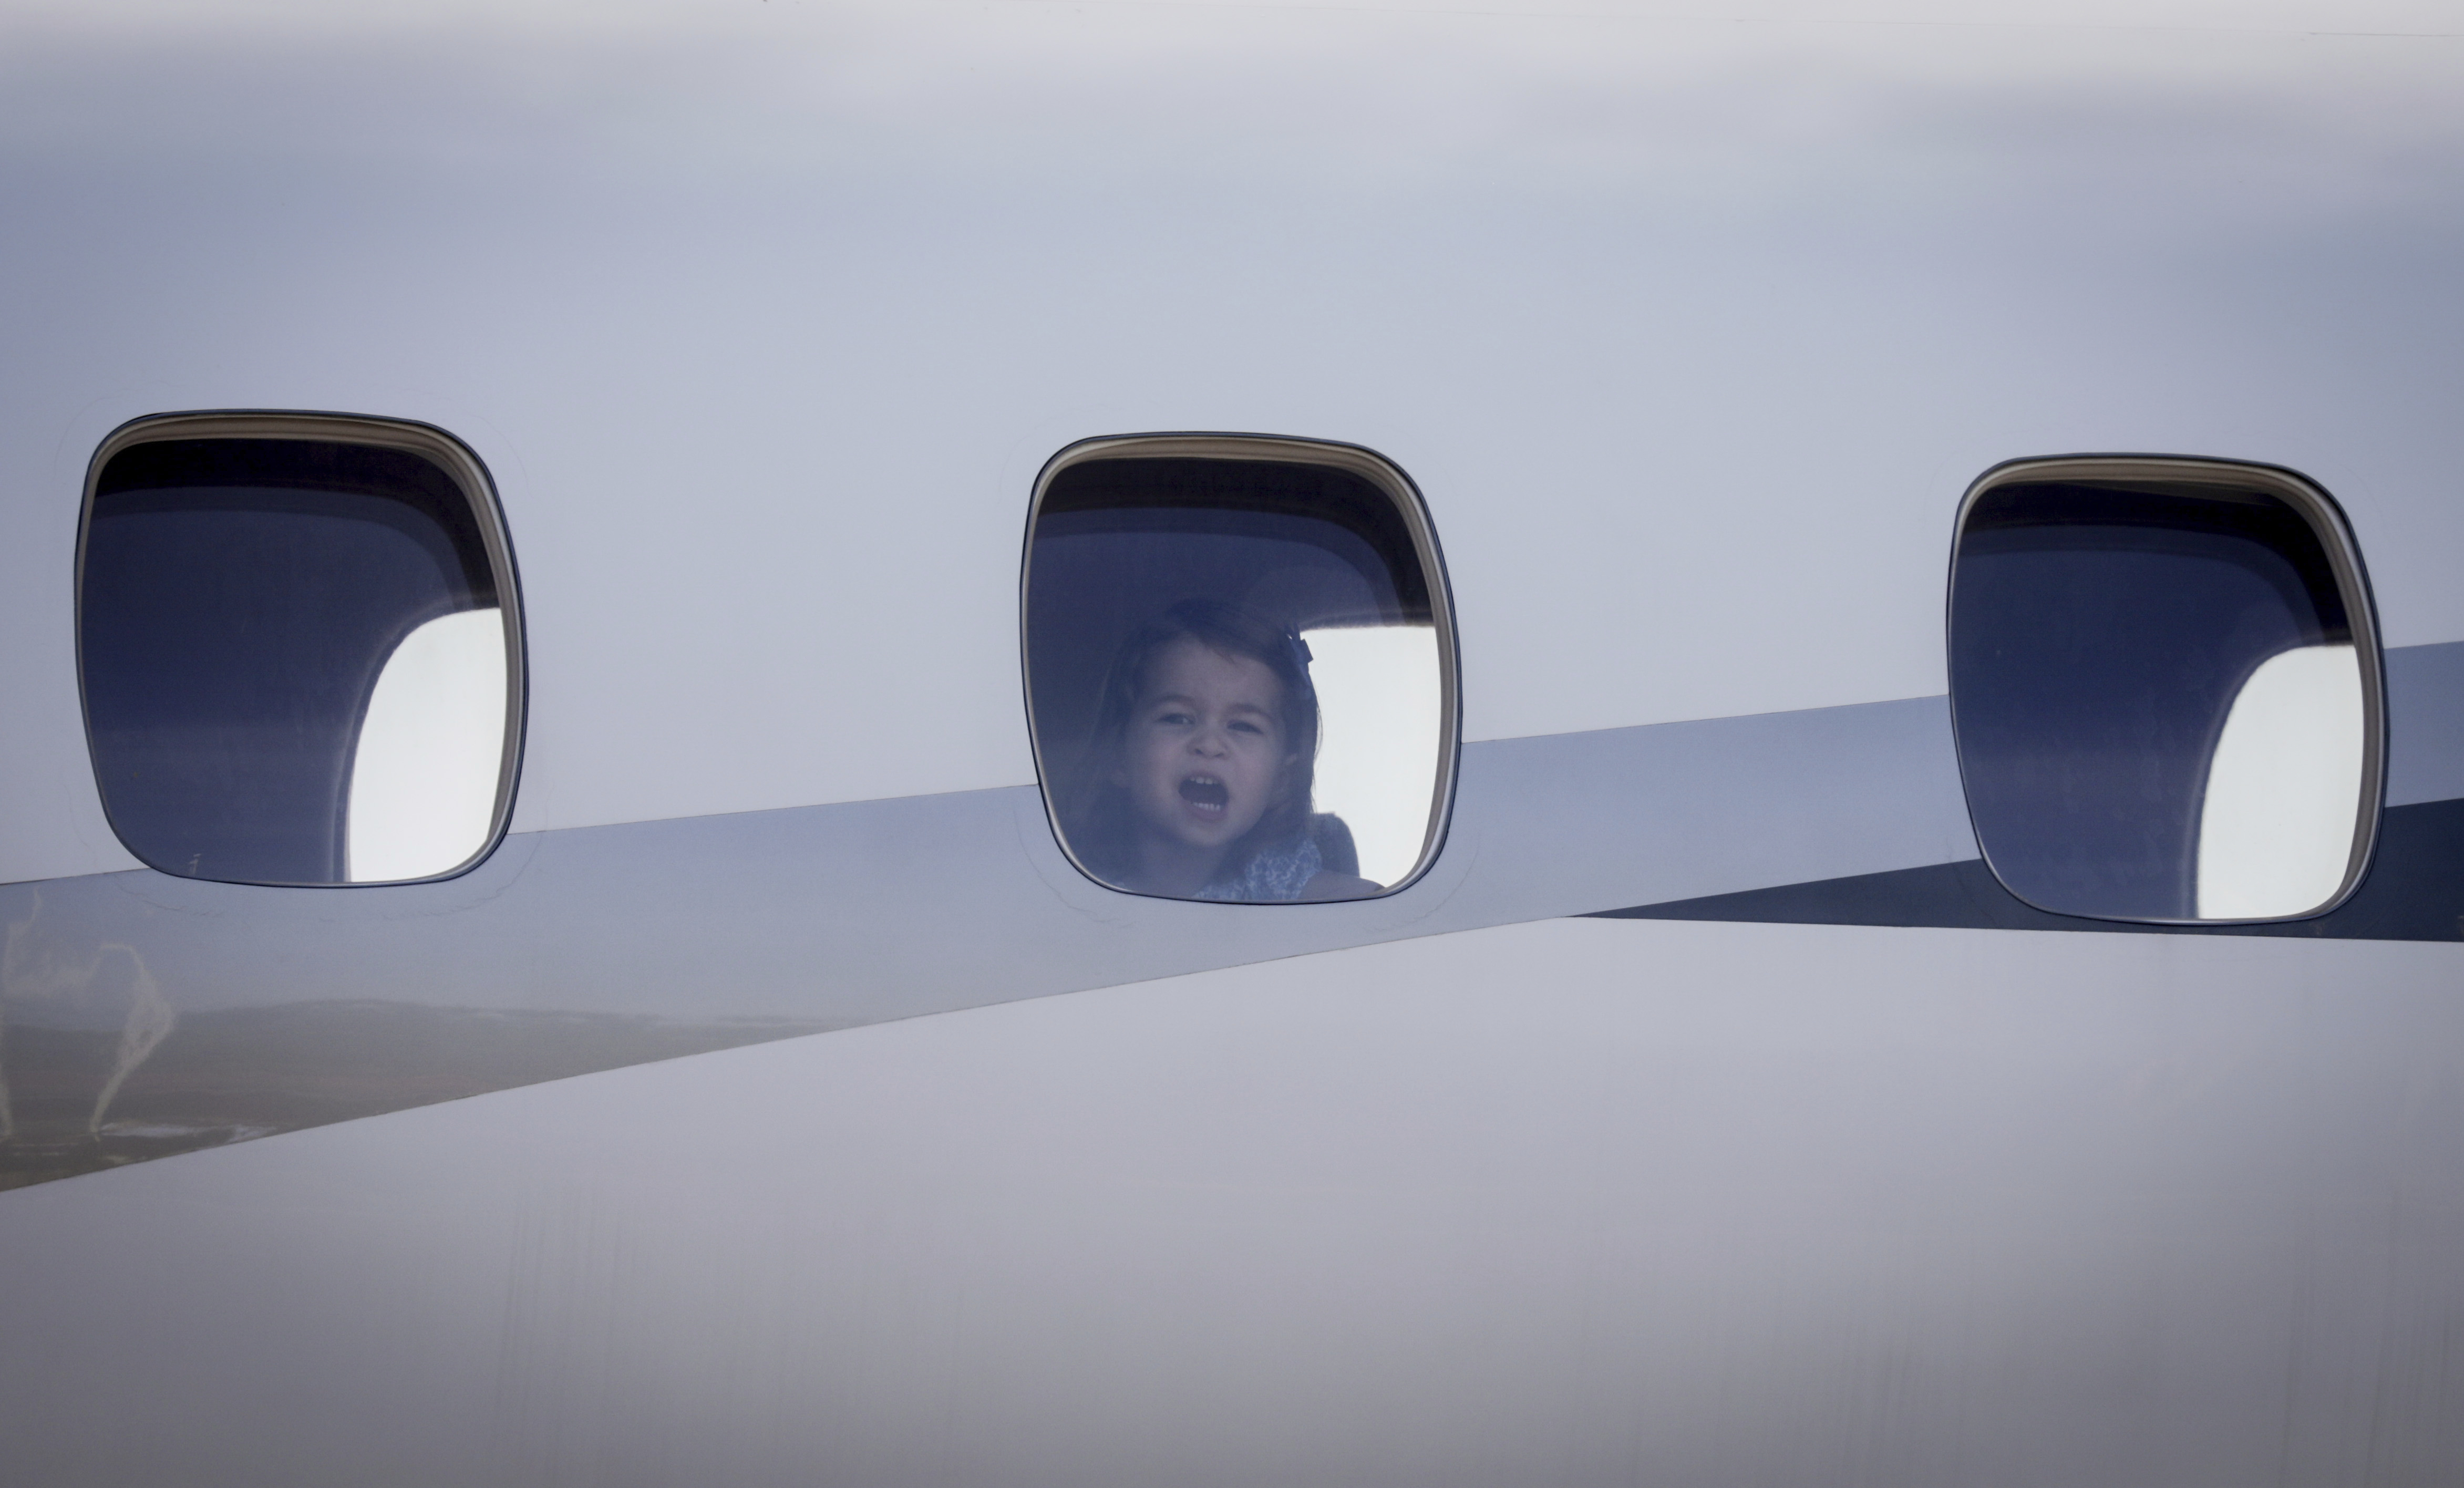 Charlotte, the daughter of Britain's Prince William and his wife Catherine, Duchess of Cambridge, looks out of the window of the plane on arrival at Tegel Airport in Berlin, Germany, 19 July 2017. Photo by: Kay Nietfeld/picture-alliance/dpa/AP Images